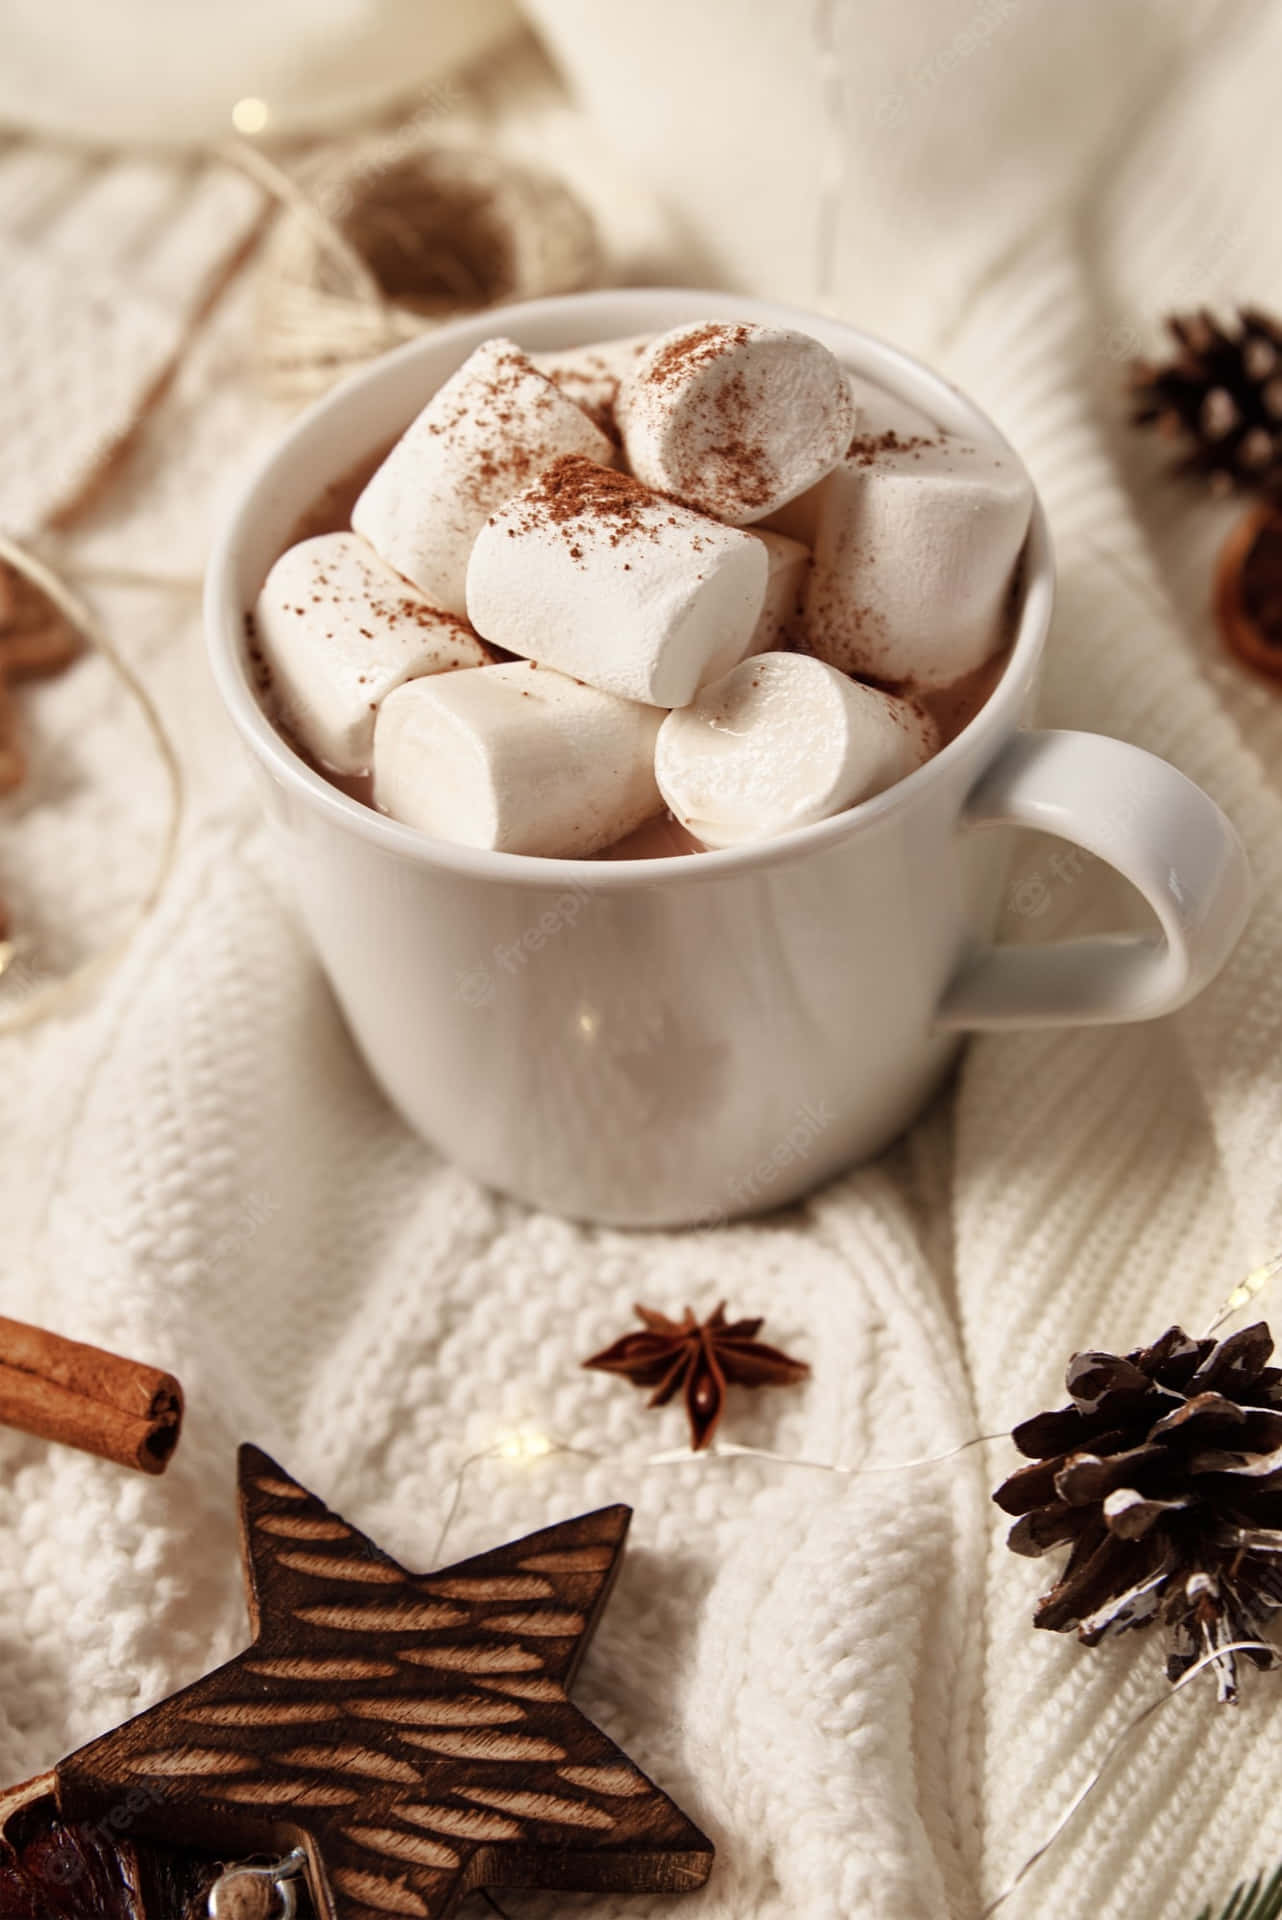 Delicious Hot Chocolate in a Ceramic Mug with Whipped Cream and Cinnamon Wallpaper